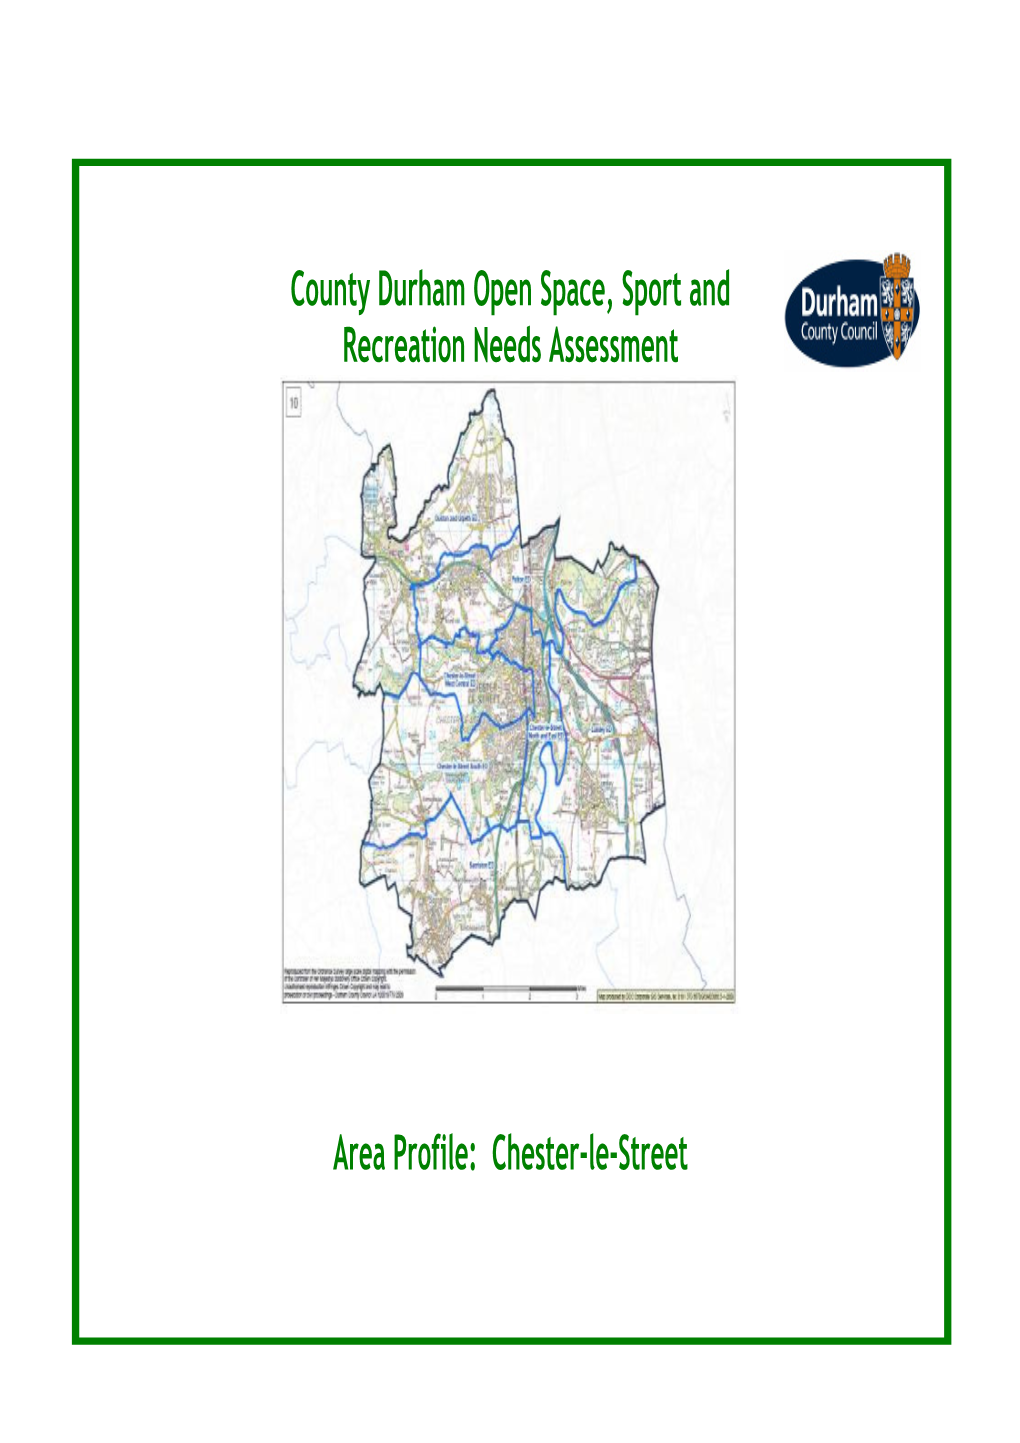 County Durham Open Space, Sport and Recreation Needs Assessment Area Profile: Chester-Le-Street